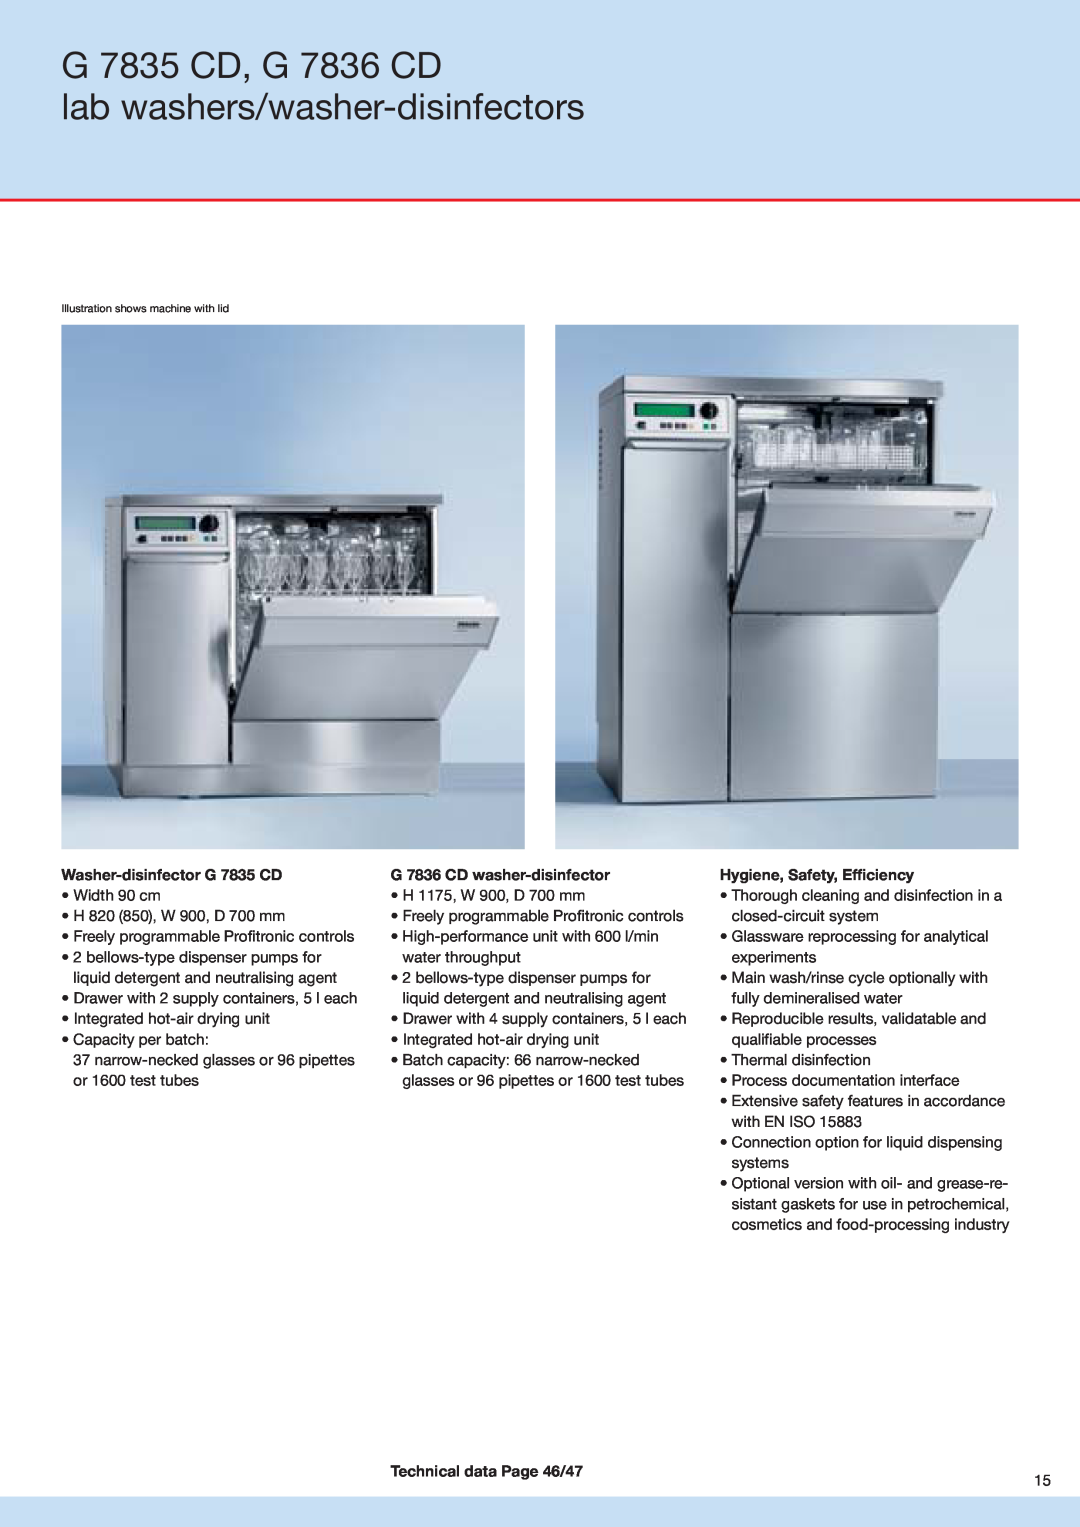 Miele G 7835 CD, G 7836 CD, lab washers/washer-disinfectors, Washer-disinfectorG 7835 CD, G 7836 CD washer-disinfector 